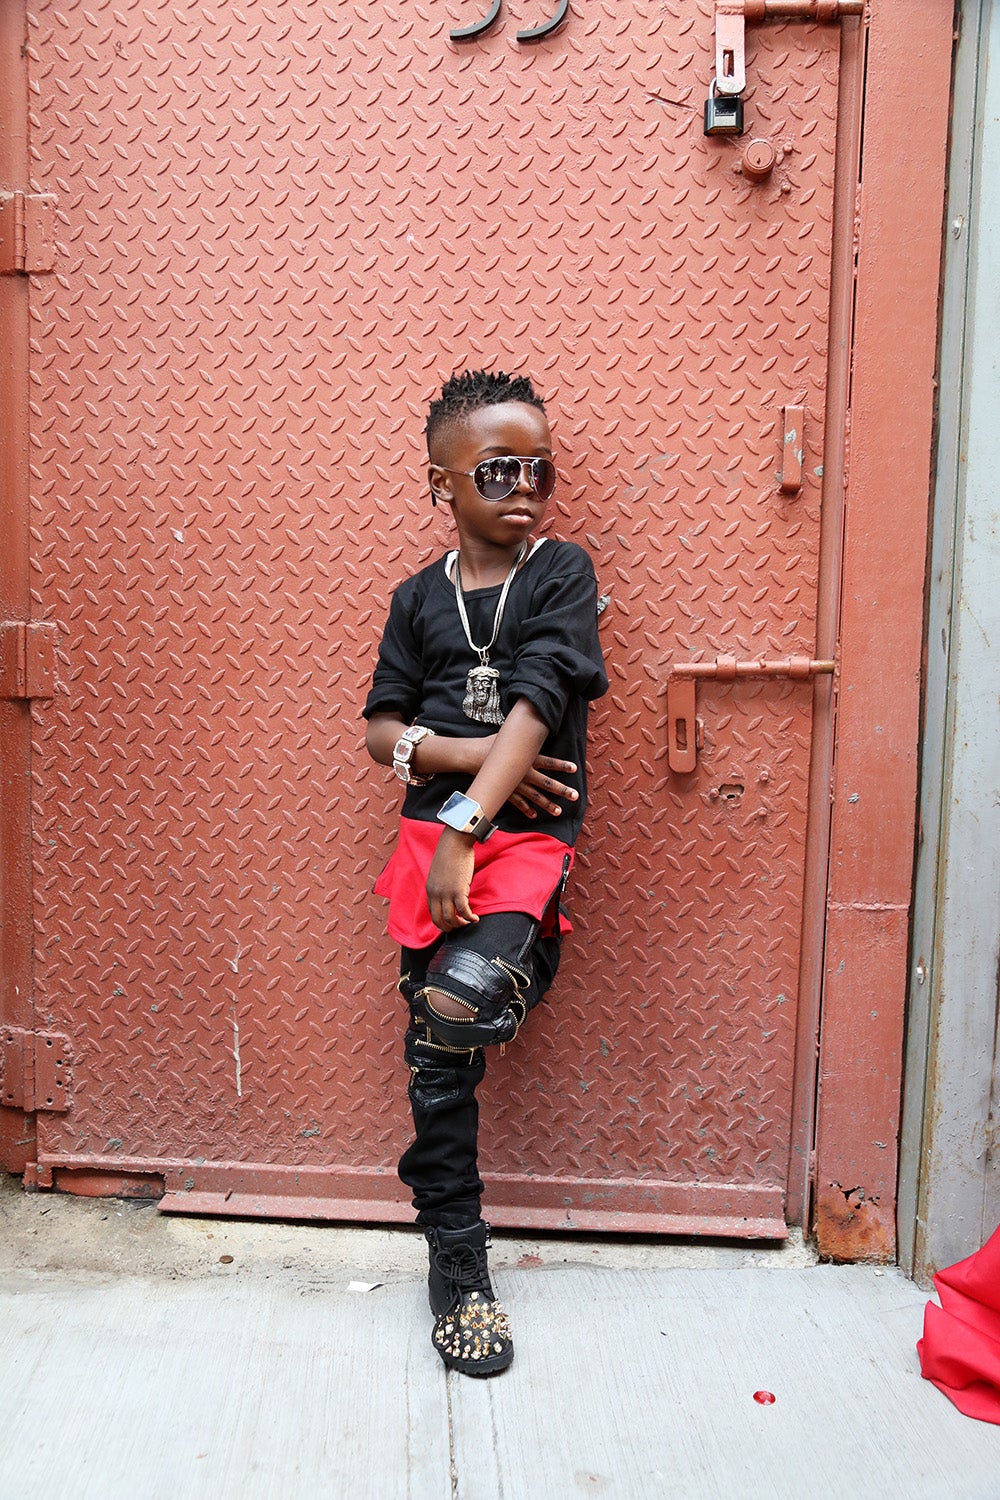 There Were So Many Stylish Kids at the ESSENCE Street Style Block Party
